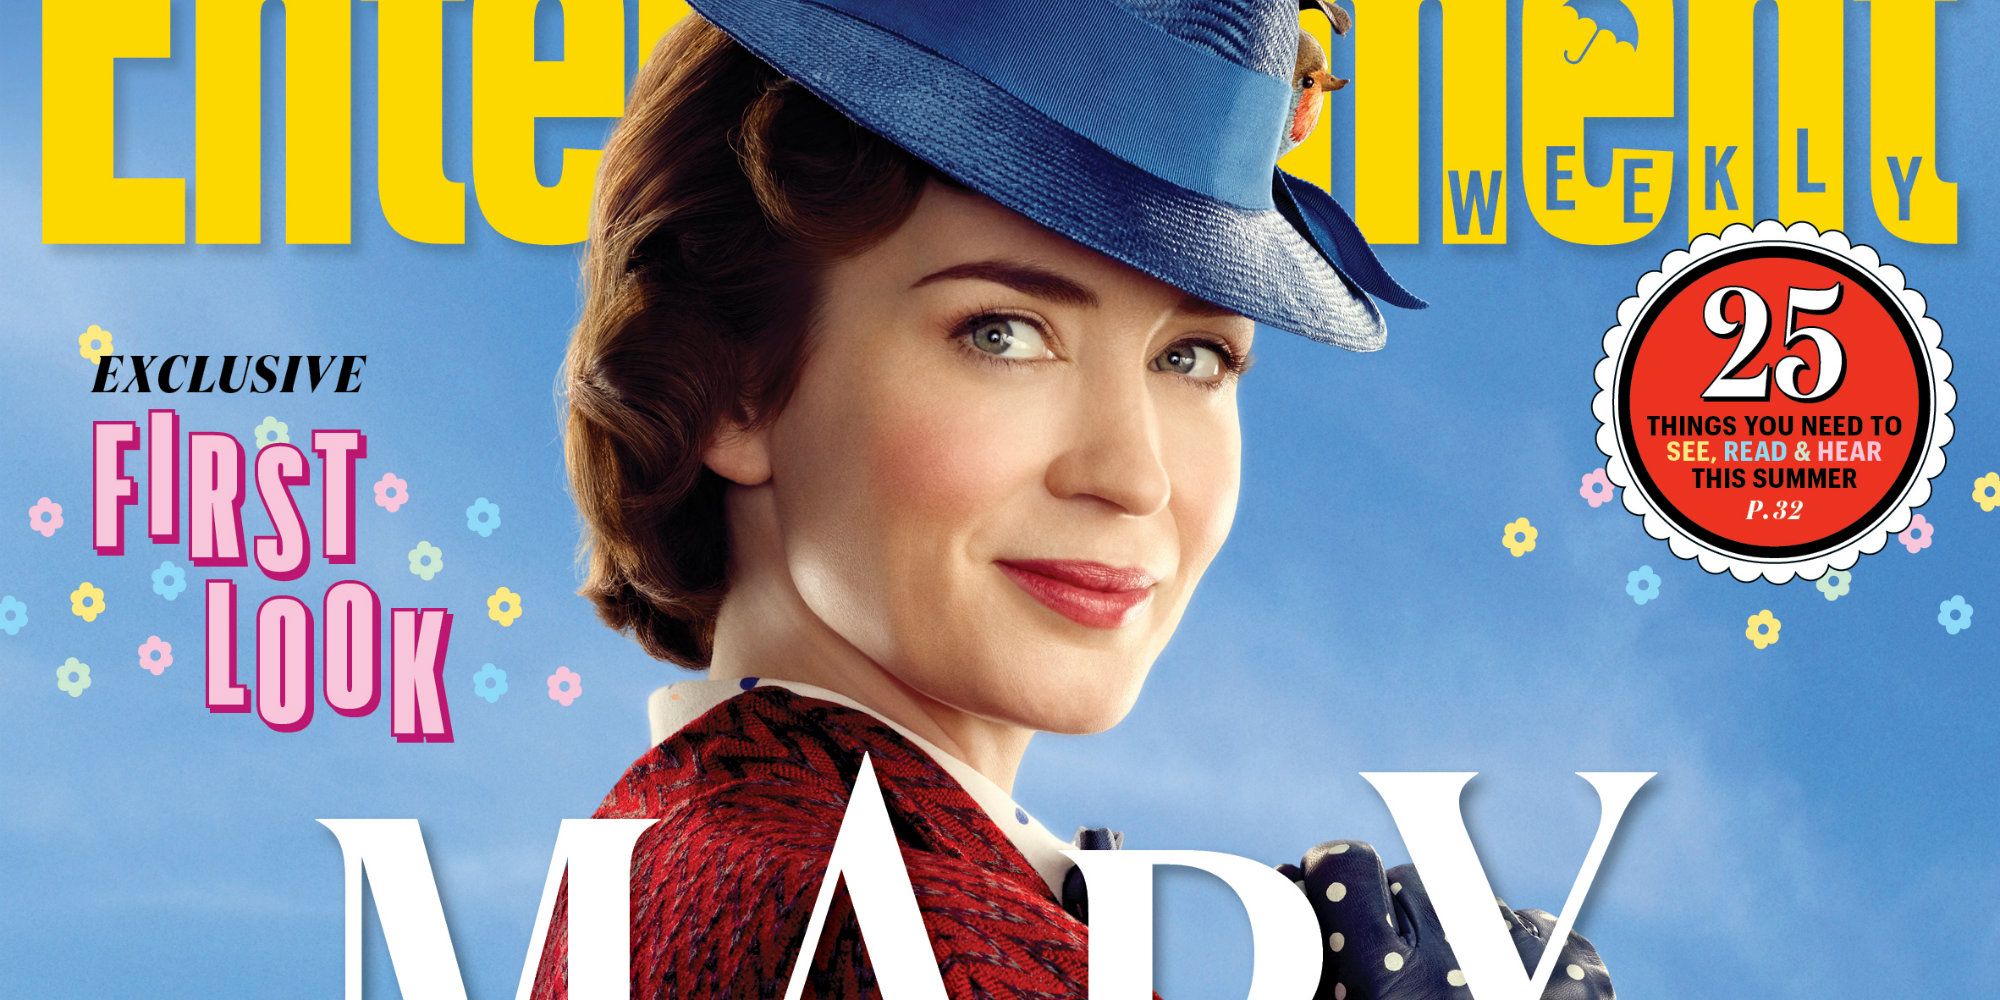 Mary Poppins Returns Plot Details: Trouble in the Banks’ Household